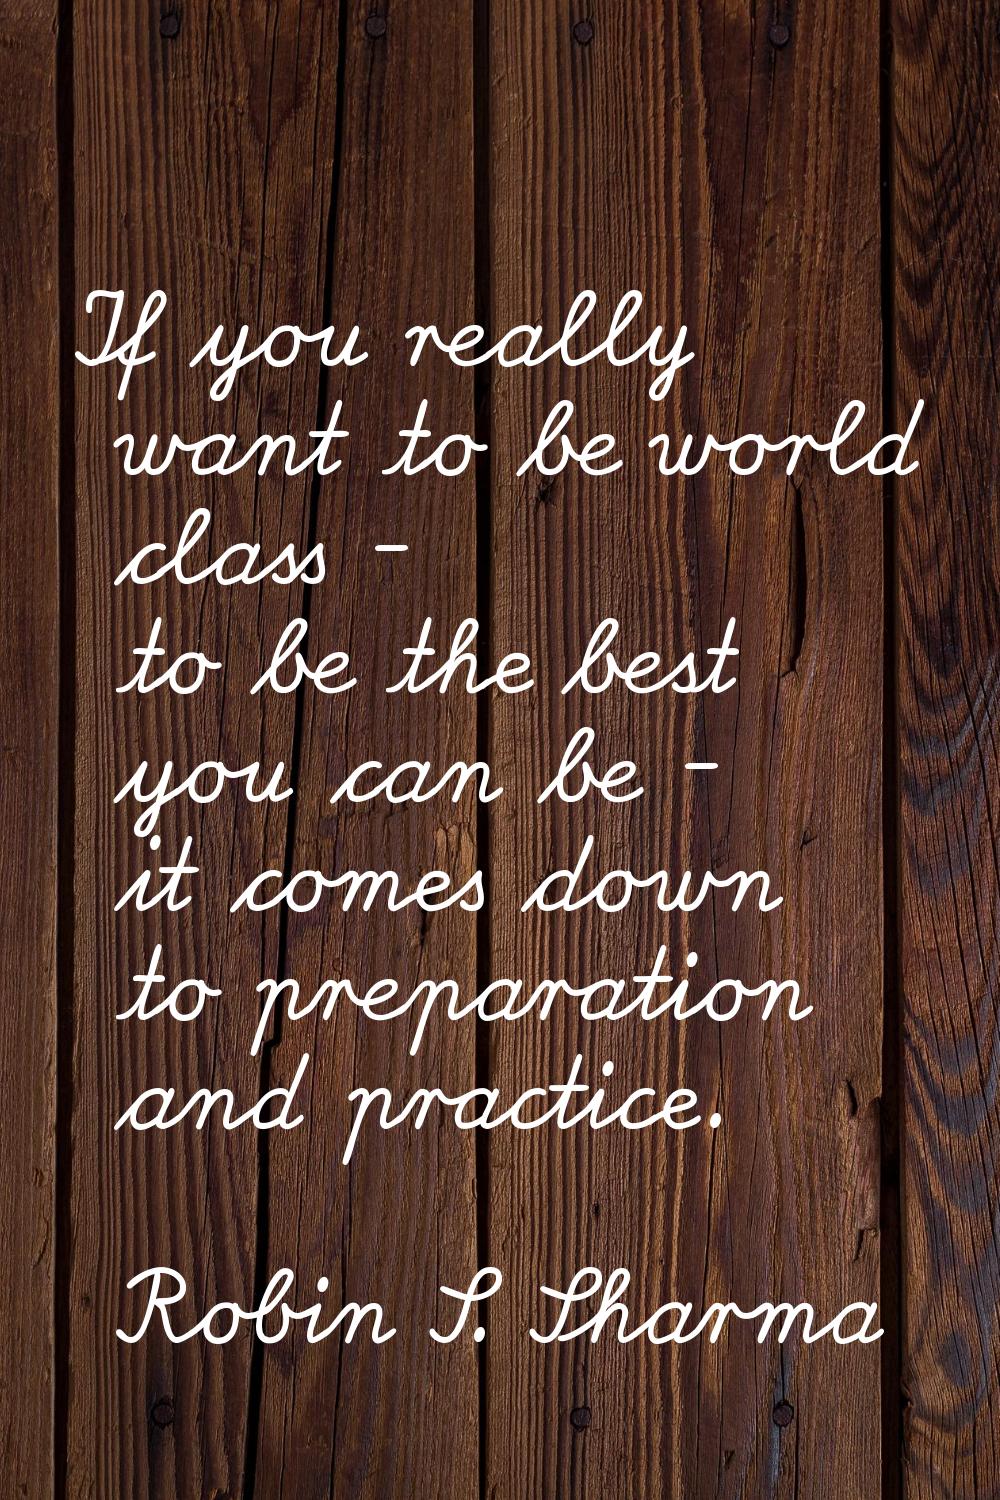 If you really want to be world class - to be the best you can be - it comes down to preparation and